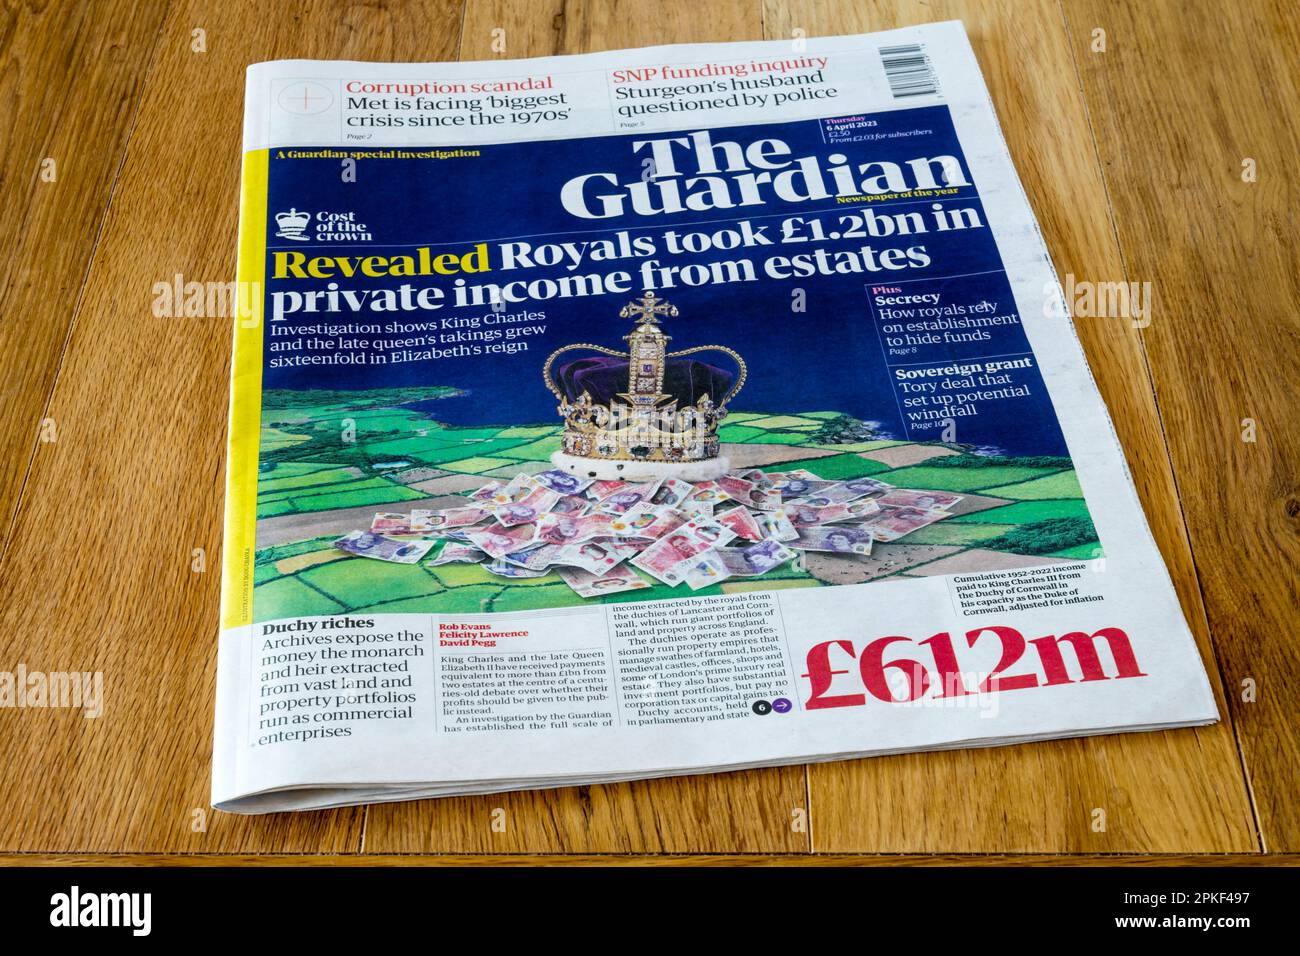 6 April 2023 front page of The Guardian reveals royal family took £1.2bn in private income from estates. Stock Photo